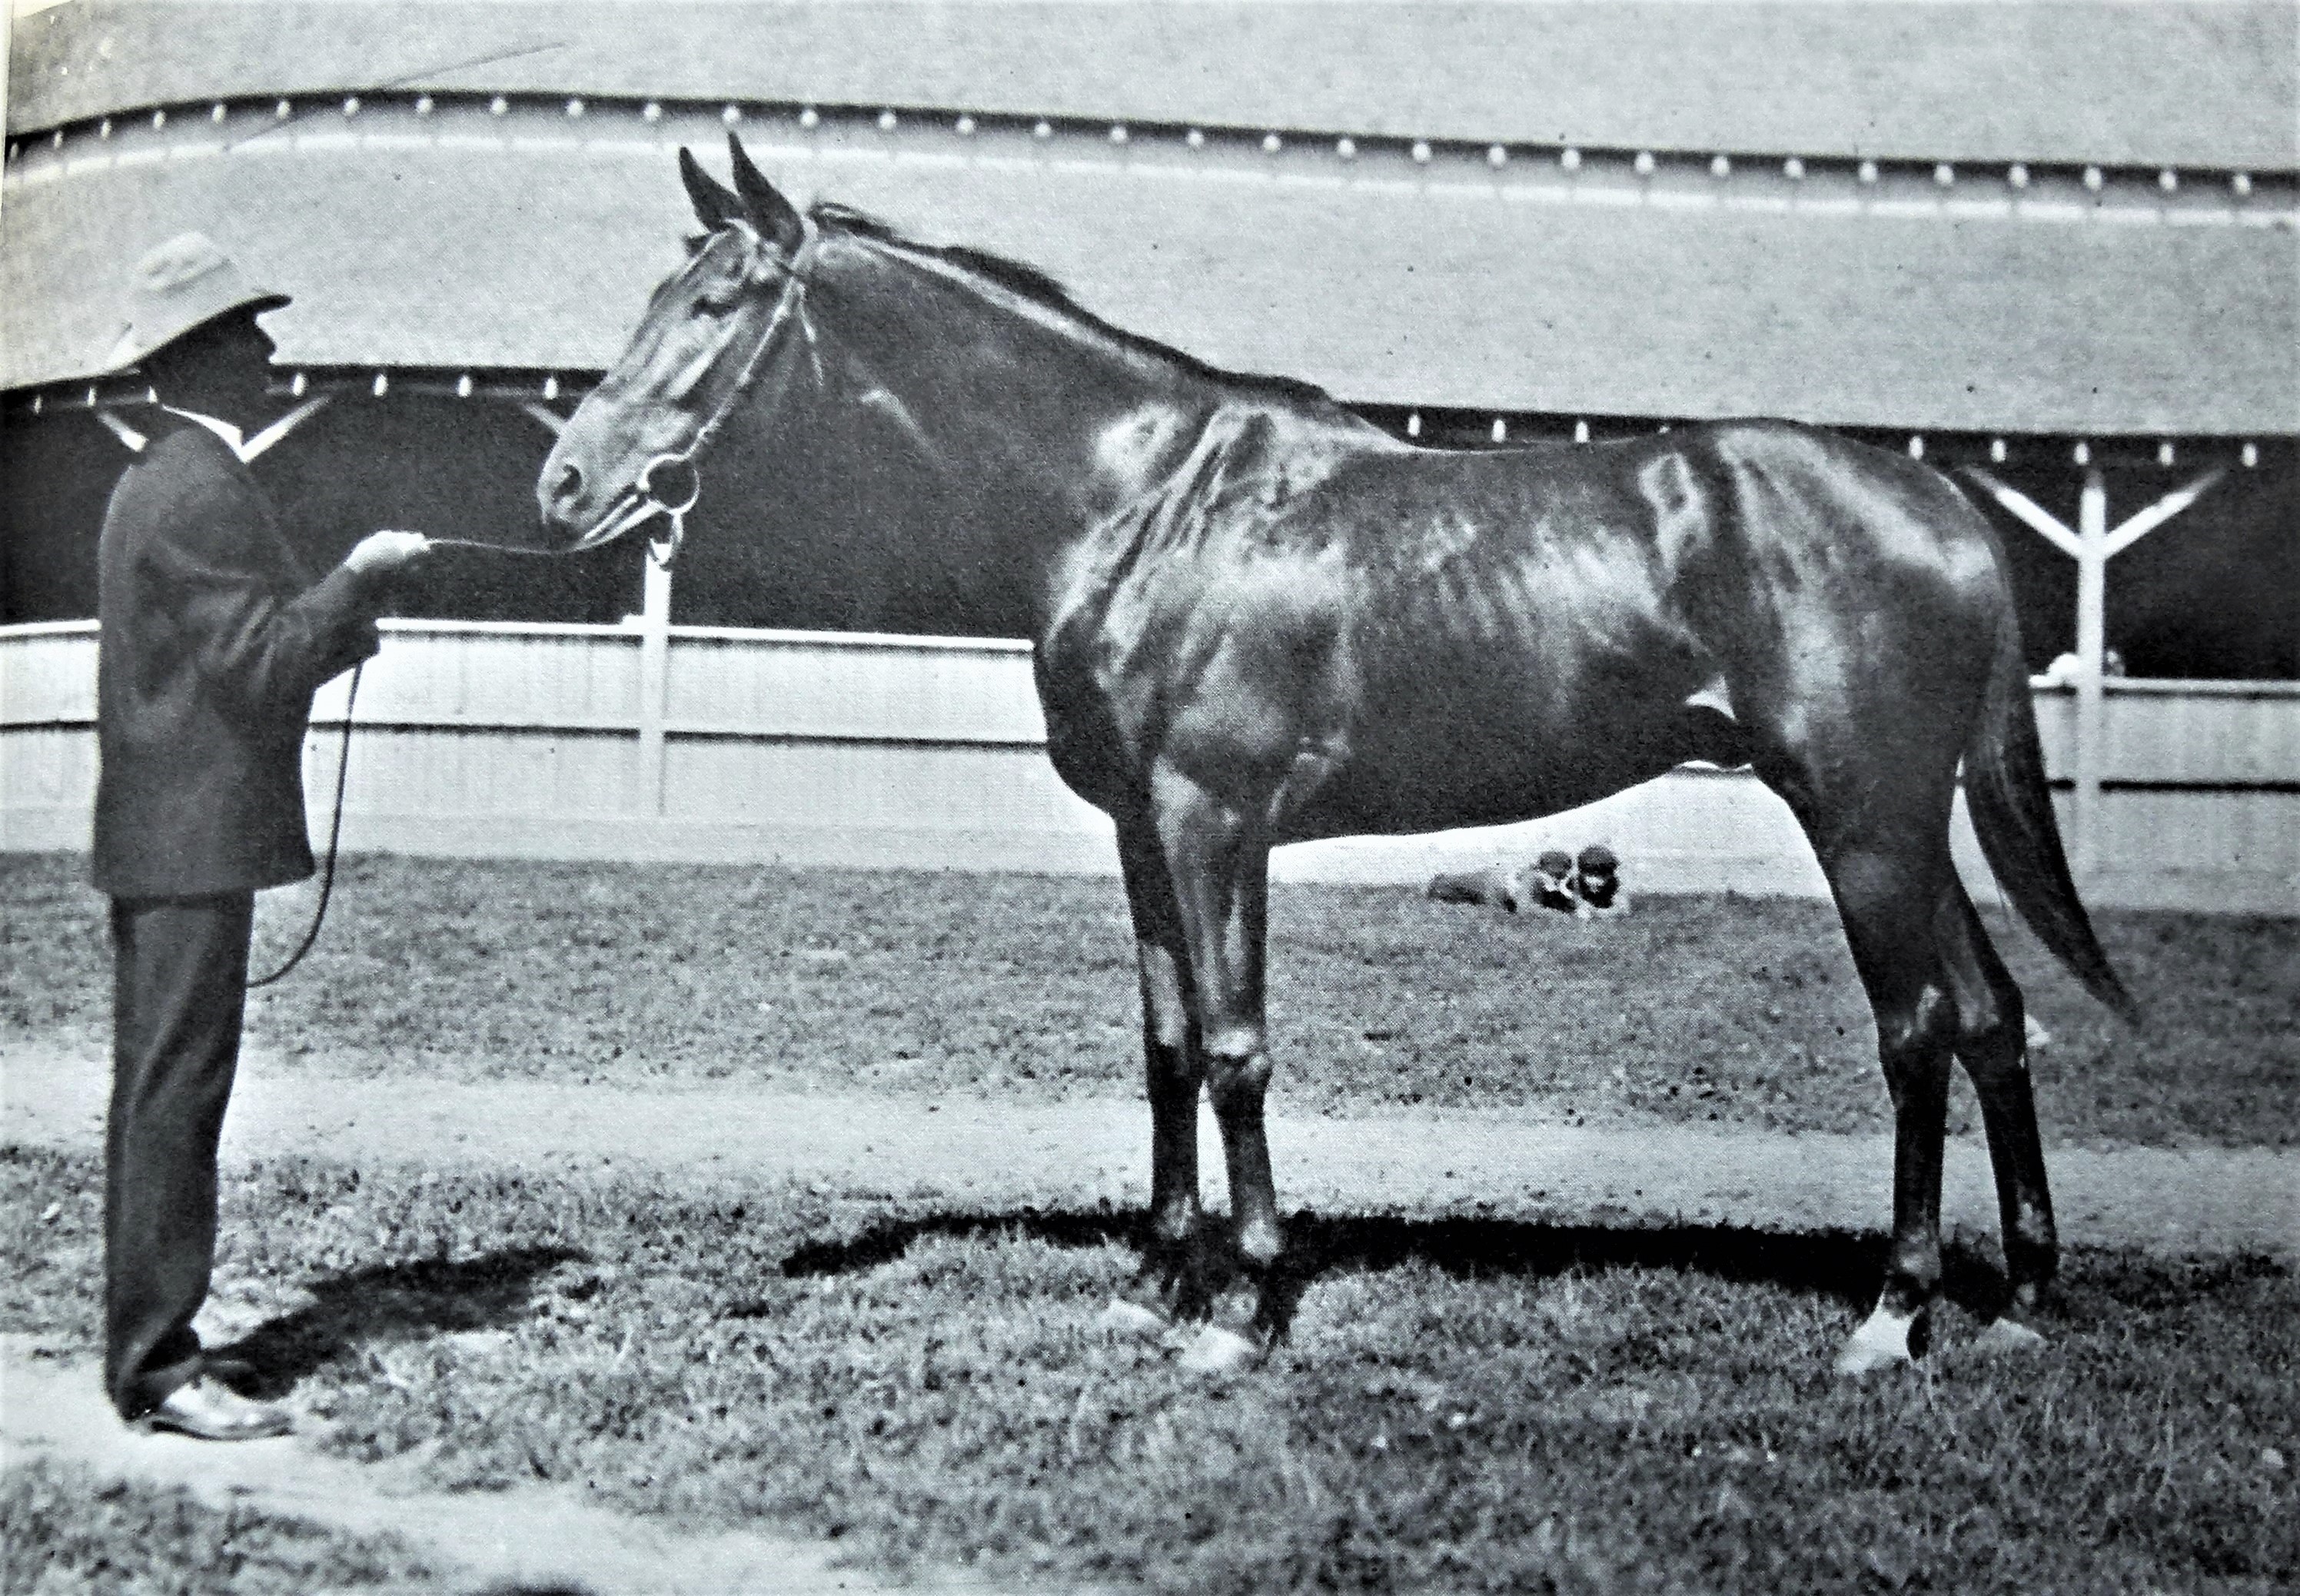 Sysonby: Artful inflicted his only defeat in a 15-race career, and his groom is said to have confessed later that he had drugged the horse before the race (in which he still ran third)